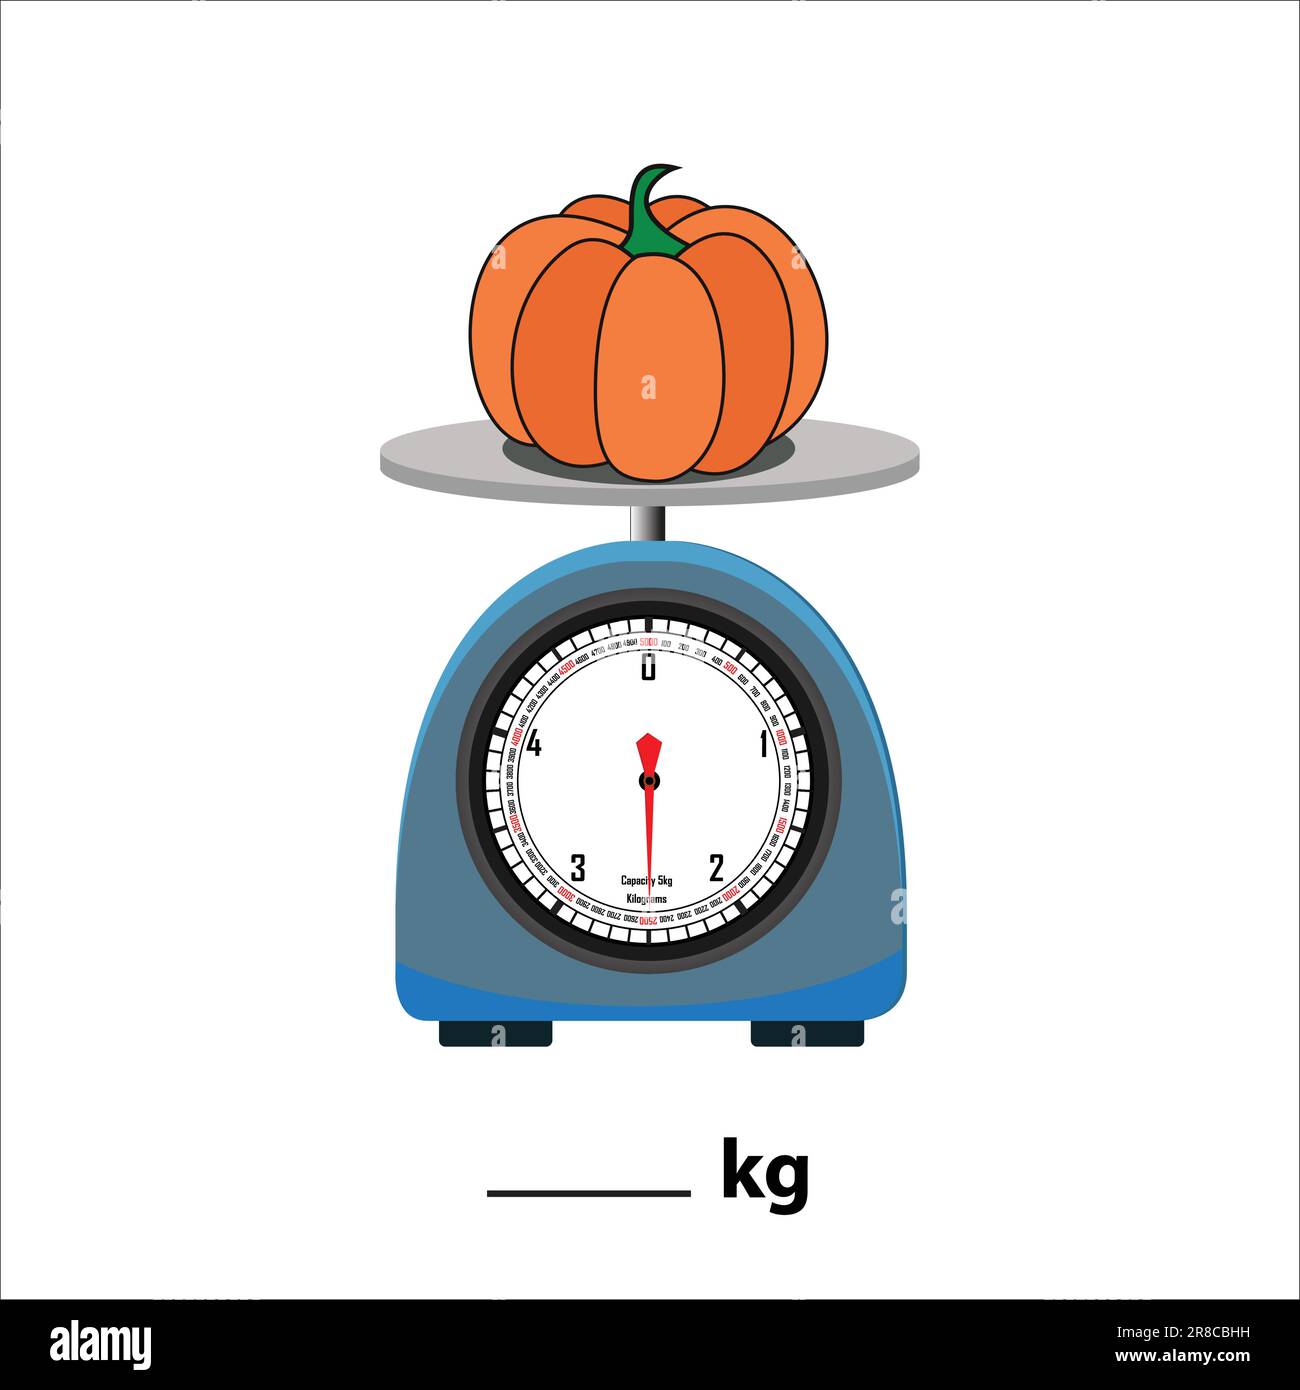 Pumpkin 2.5kg on a weighing scale, isolate on white background. Weight balance vector illustration. Equilibrium comparison sign business concept. Stock Vector